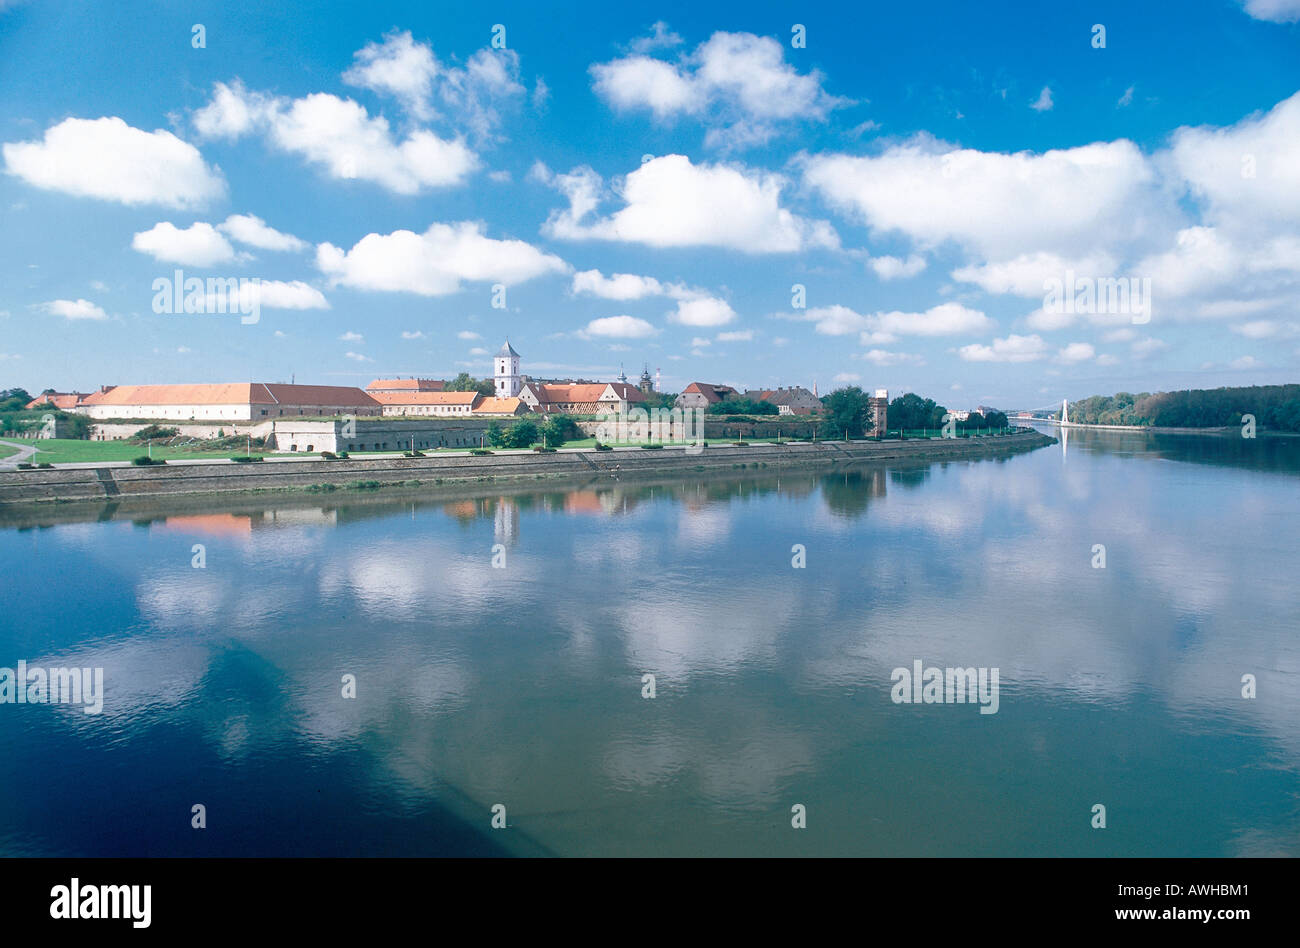 Croatia, Slavonia, Tvrda, town of Osijek and clouds reflected in water of River Drava Stock Photo